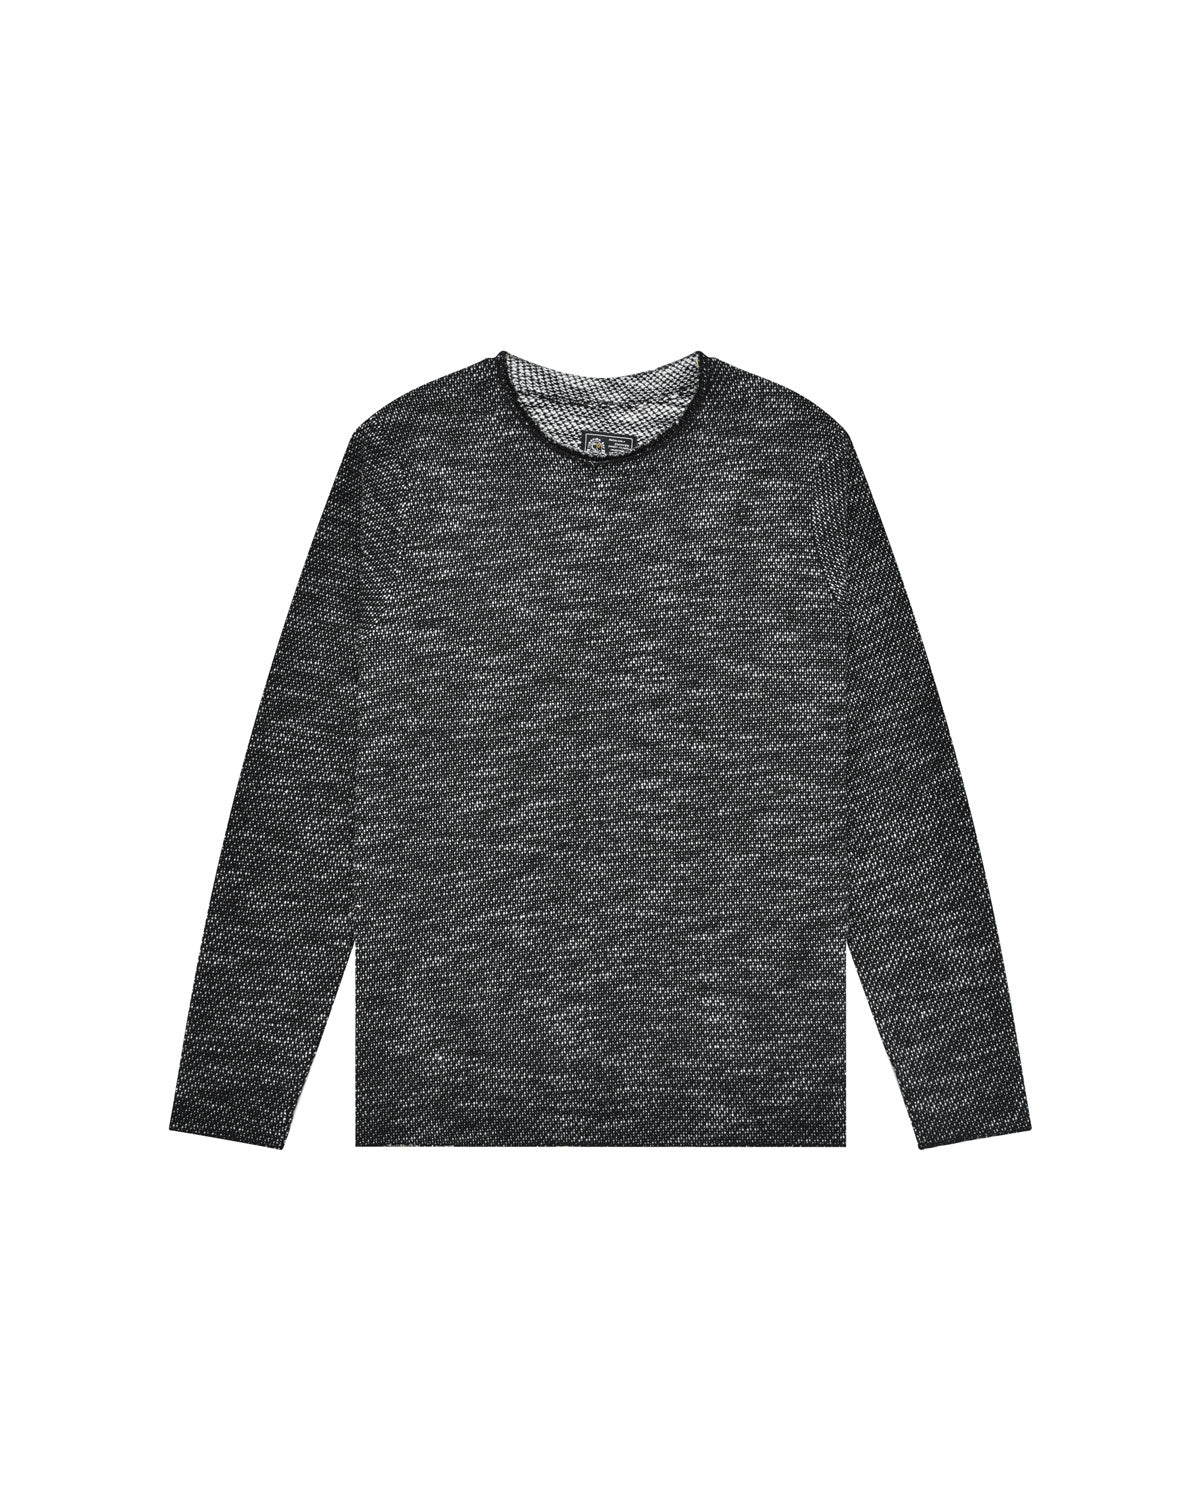 Man | Black Knitted Crew Neck Pullover